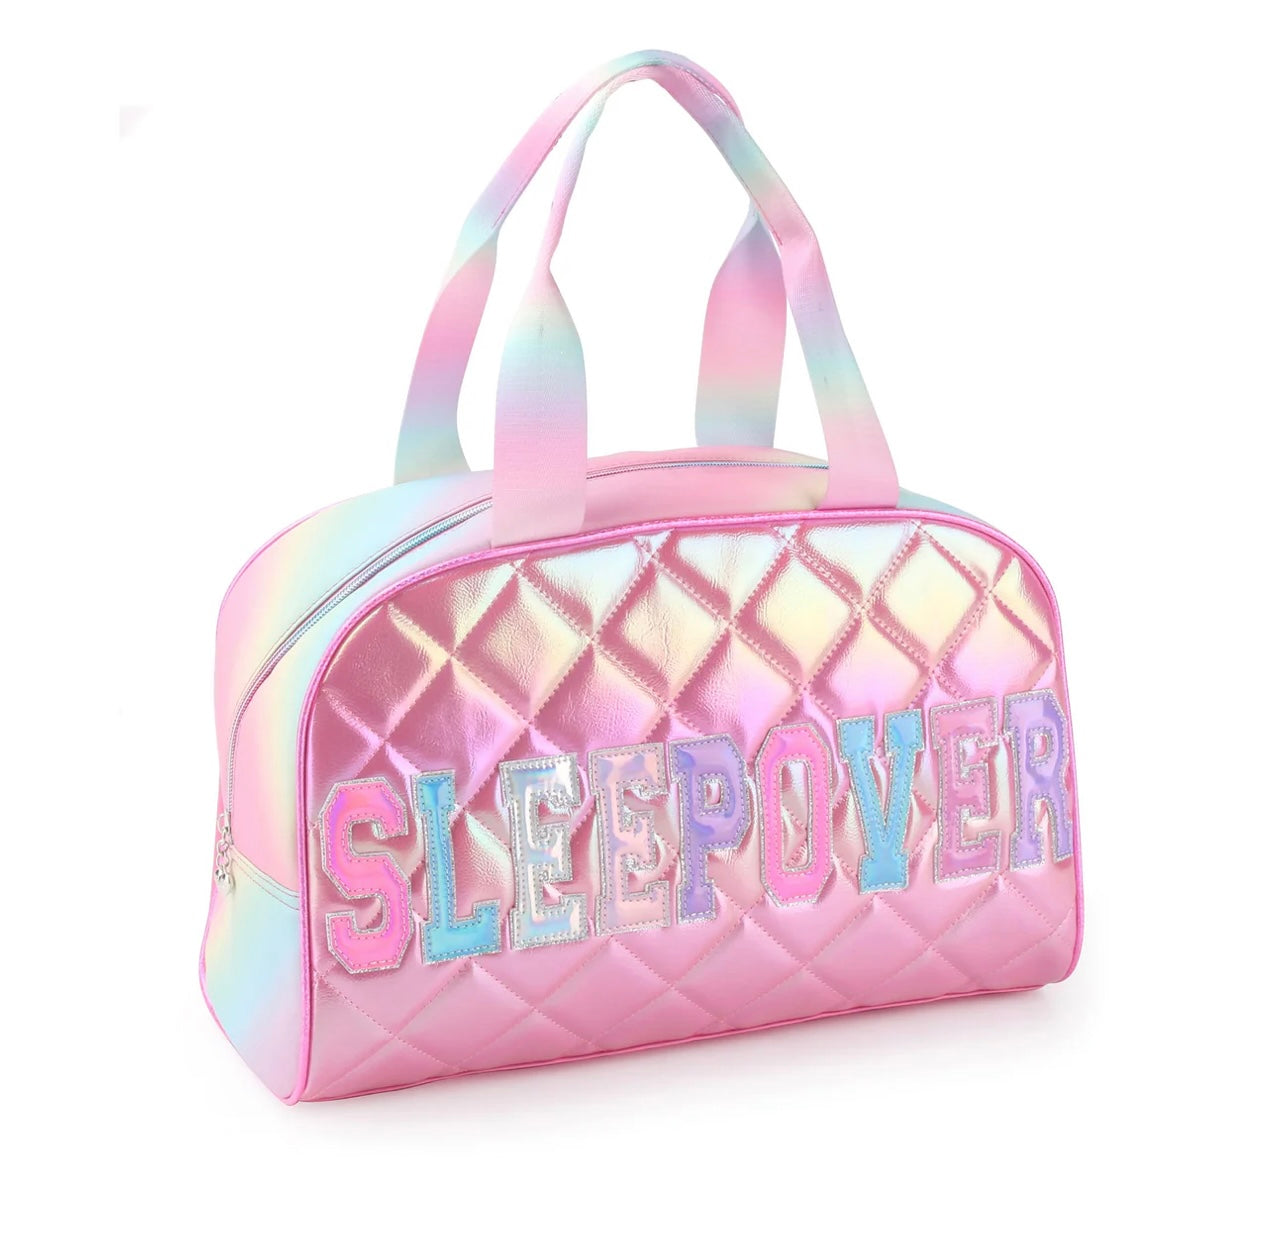 Sleepover Quilted Duffle Bag – Sugar Boutique